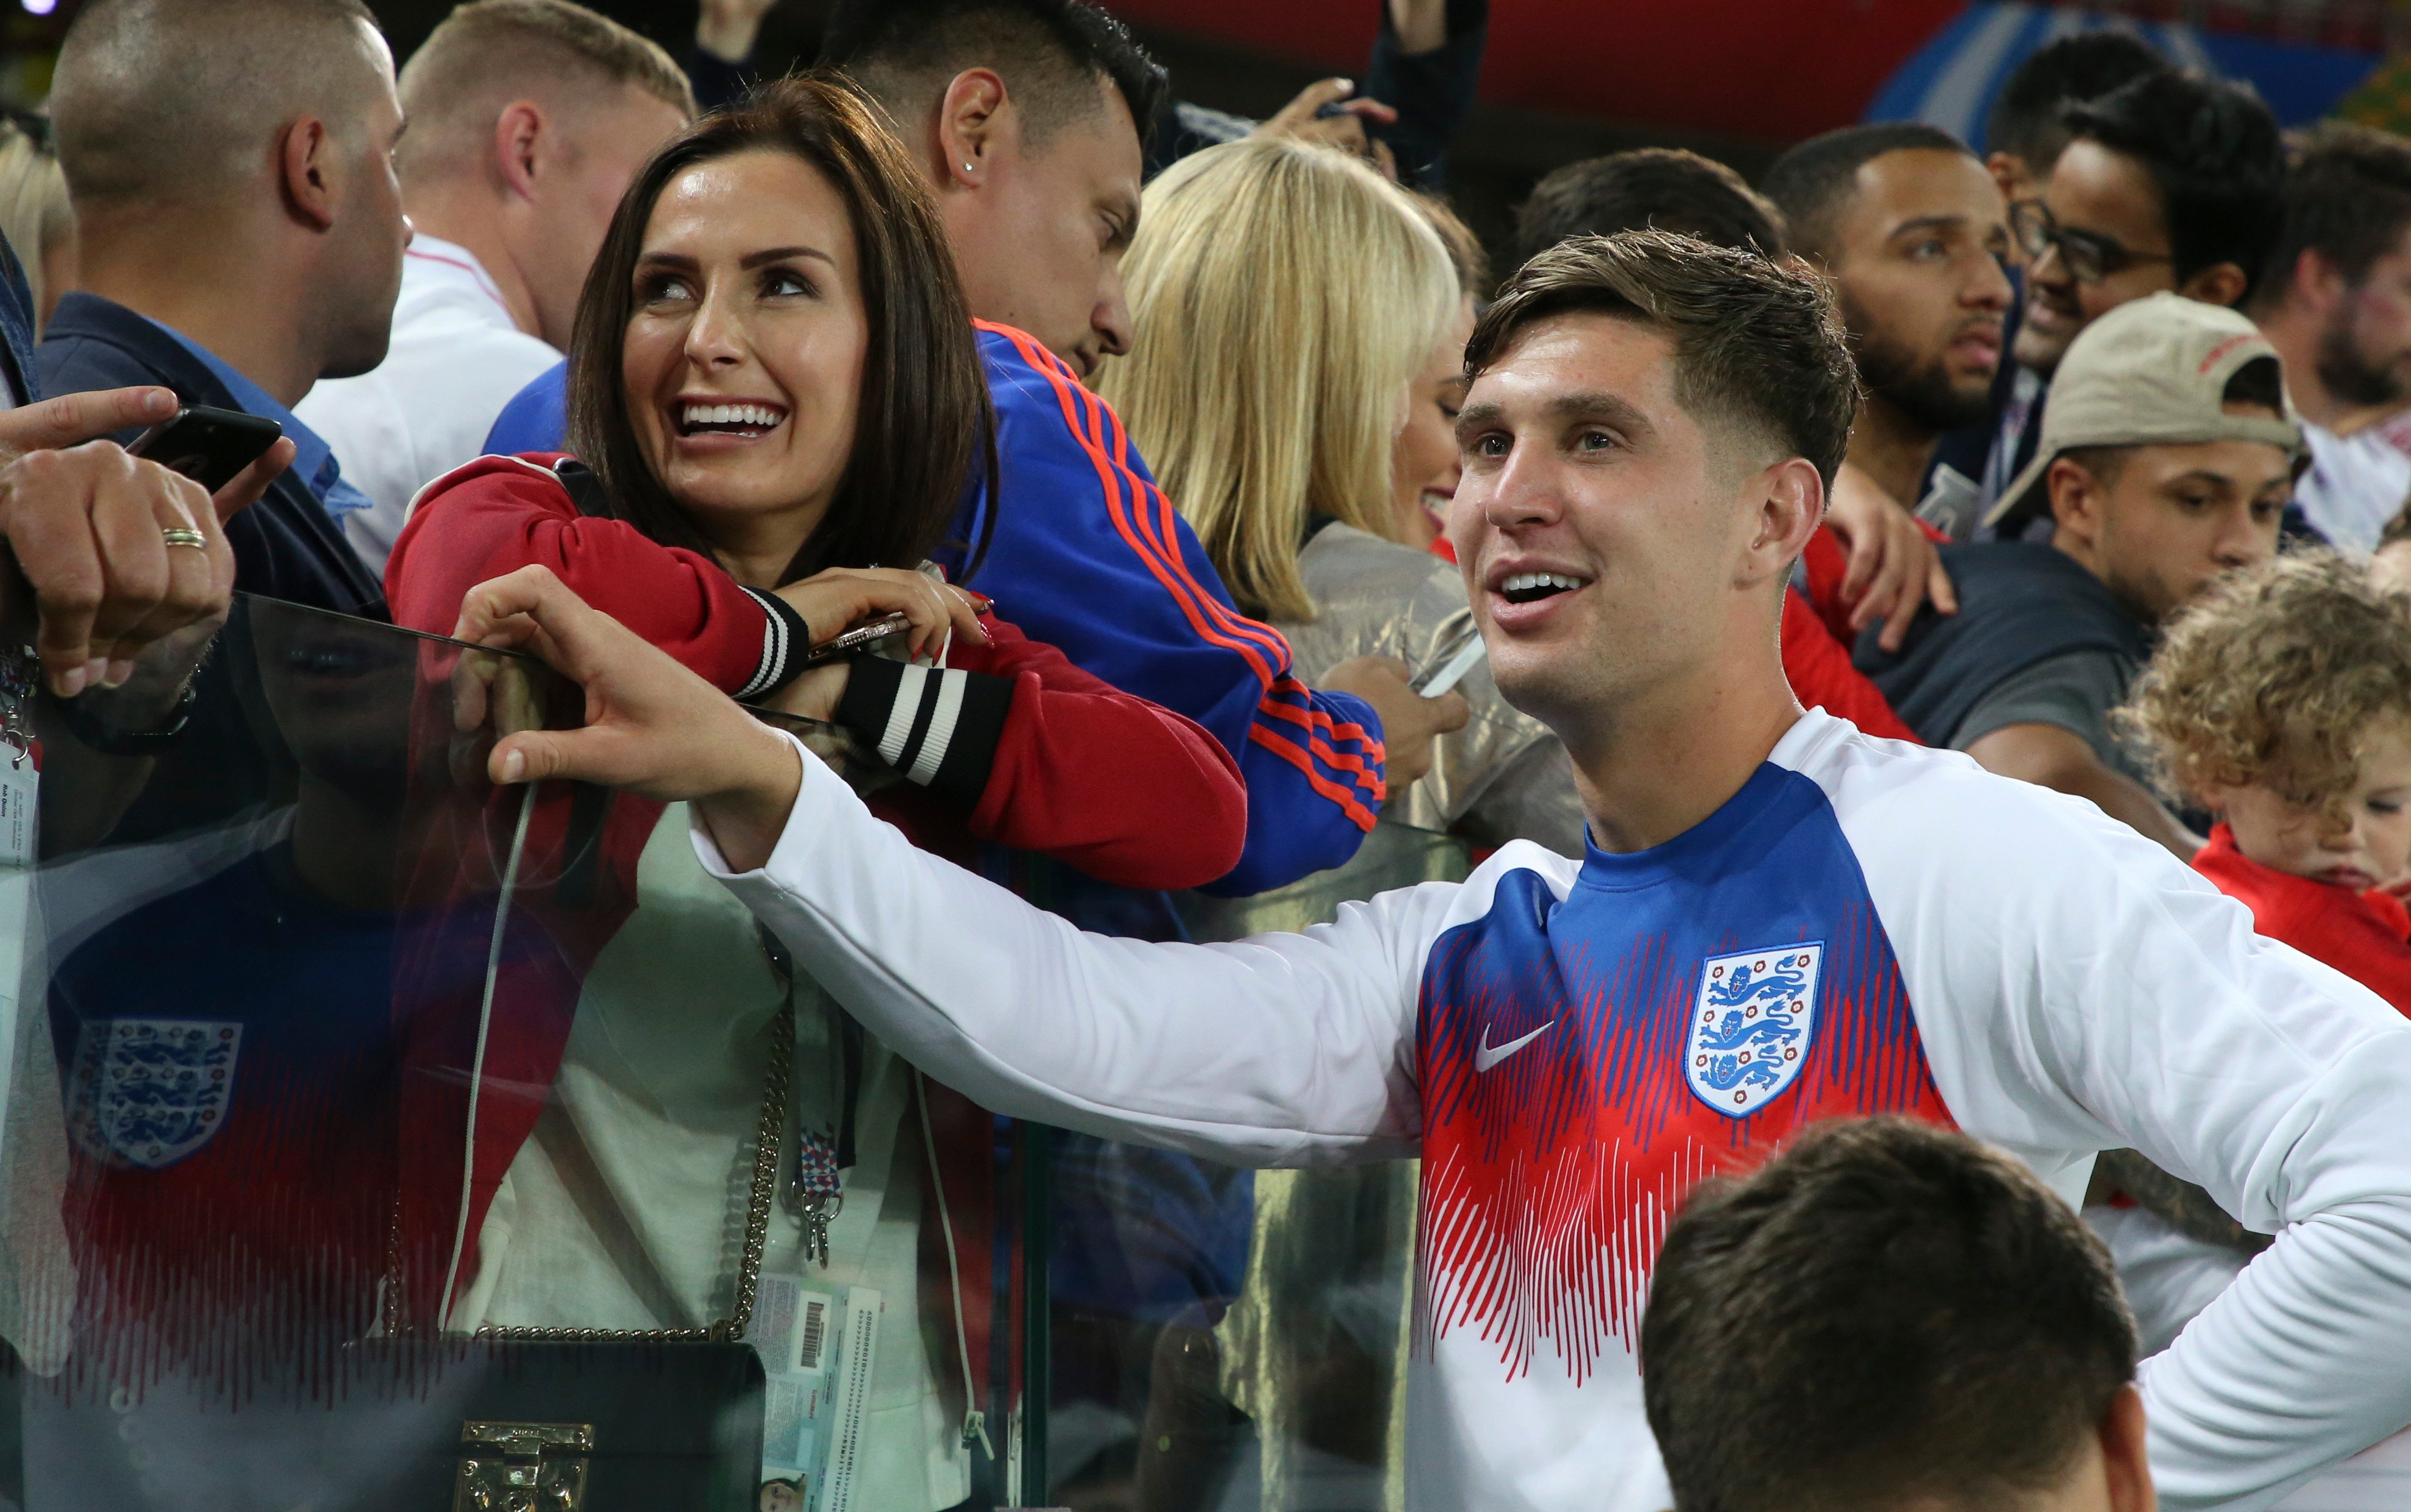  The £50million-rated player dumped Millie months after he helped England into the semi-finals of the World Cup in Russia